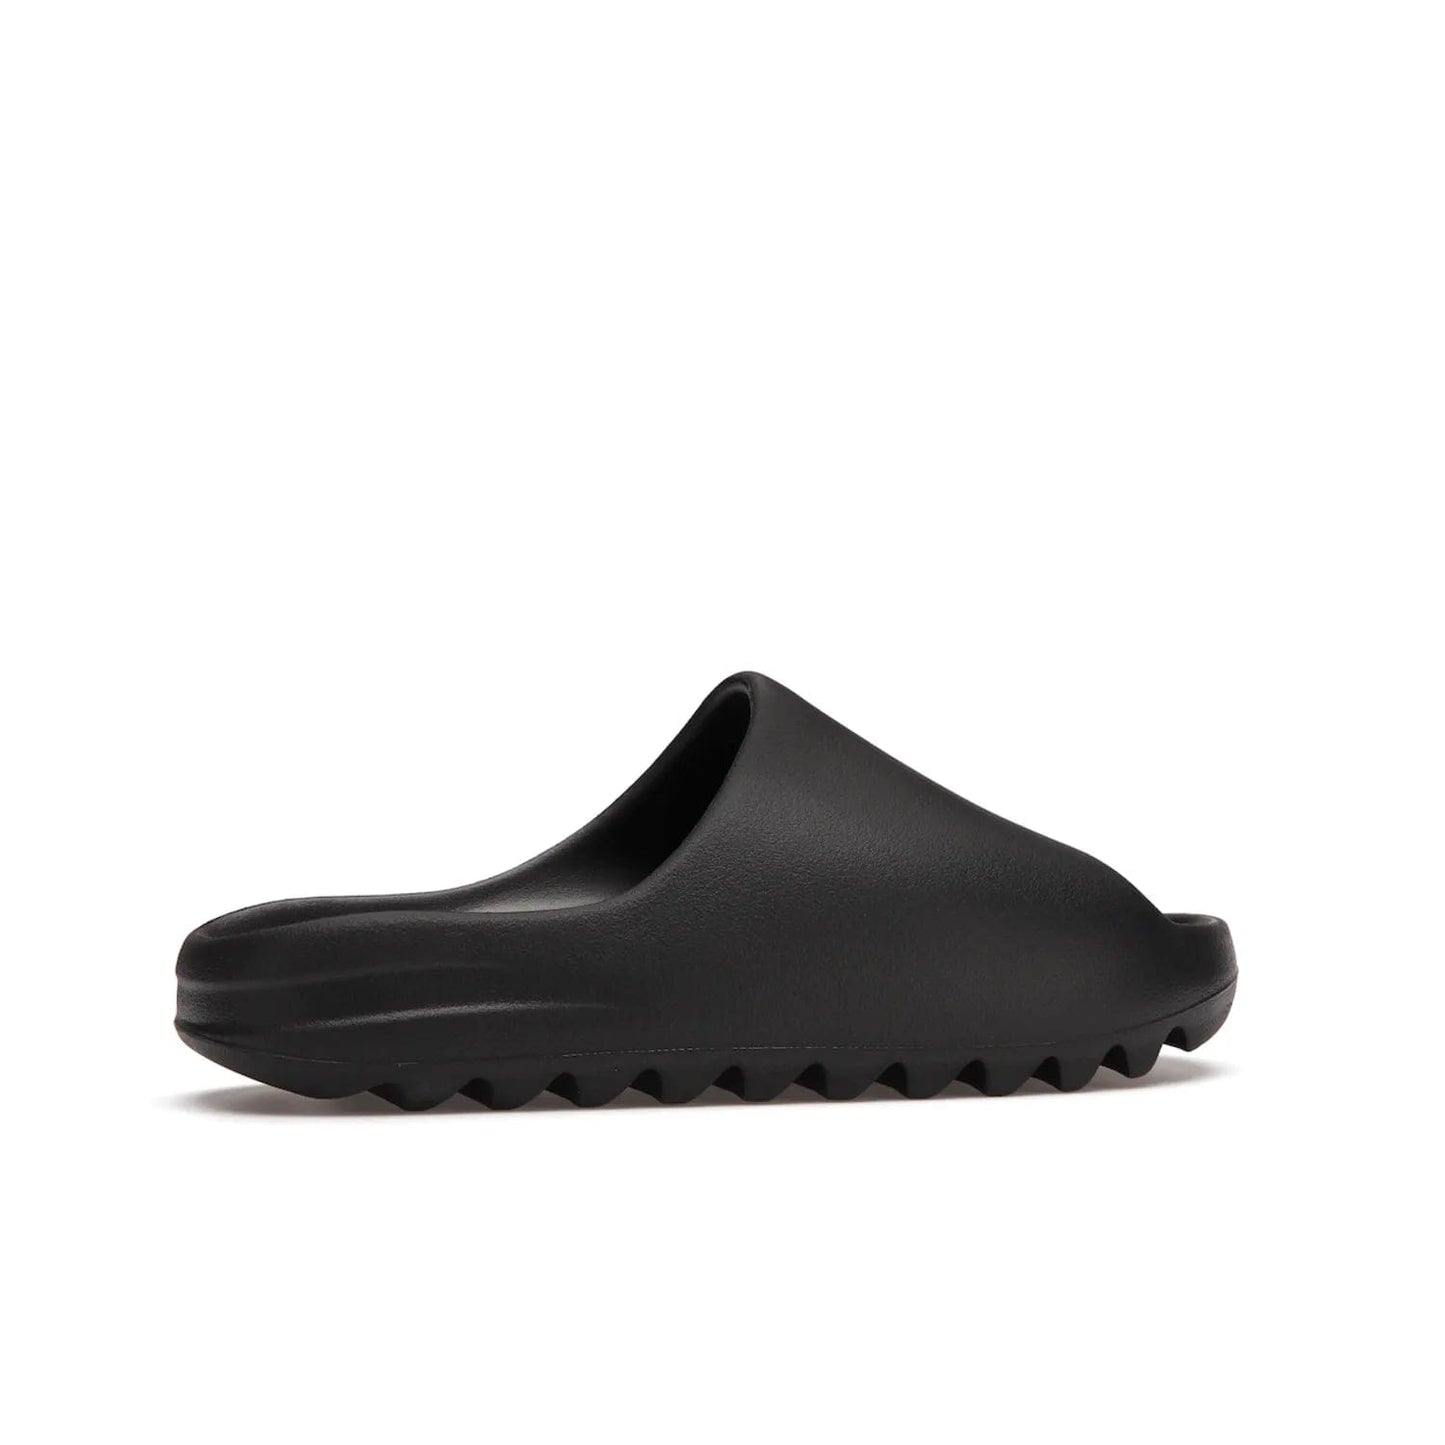 adidas Yeezy Slide Onyx - Image 35 - Only at www.BallersClubKickz.com - Step into comfort and style with the adidas Yeezy Slide Onyx. Featuring foam construction, an all-black colorway and a grooved outsole for stability and responsiveness, this versatile slide is a must-have for your collection.